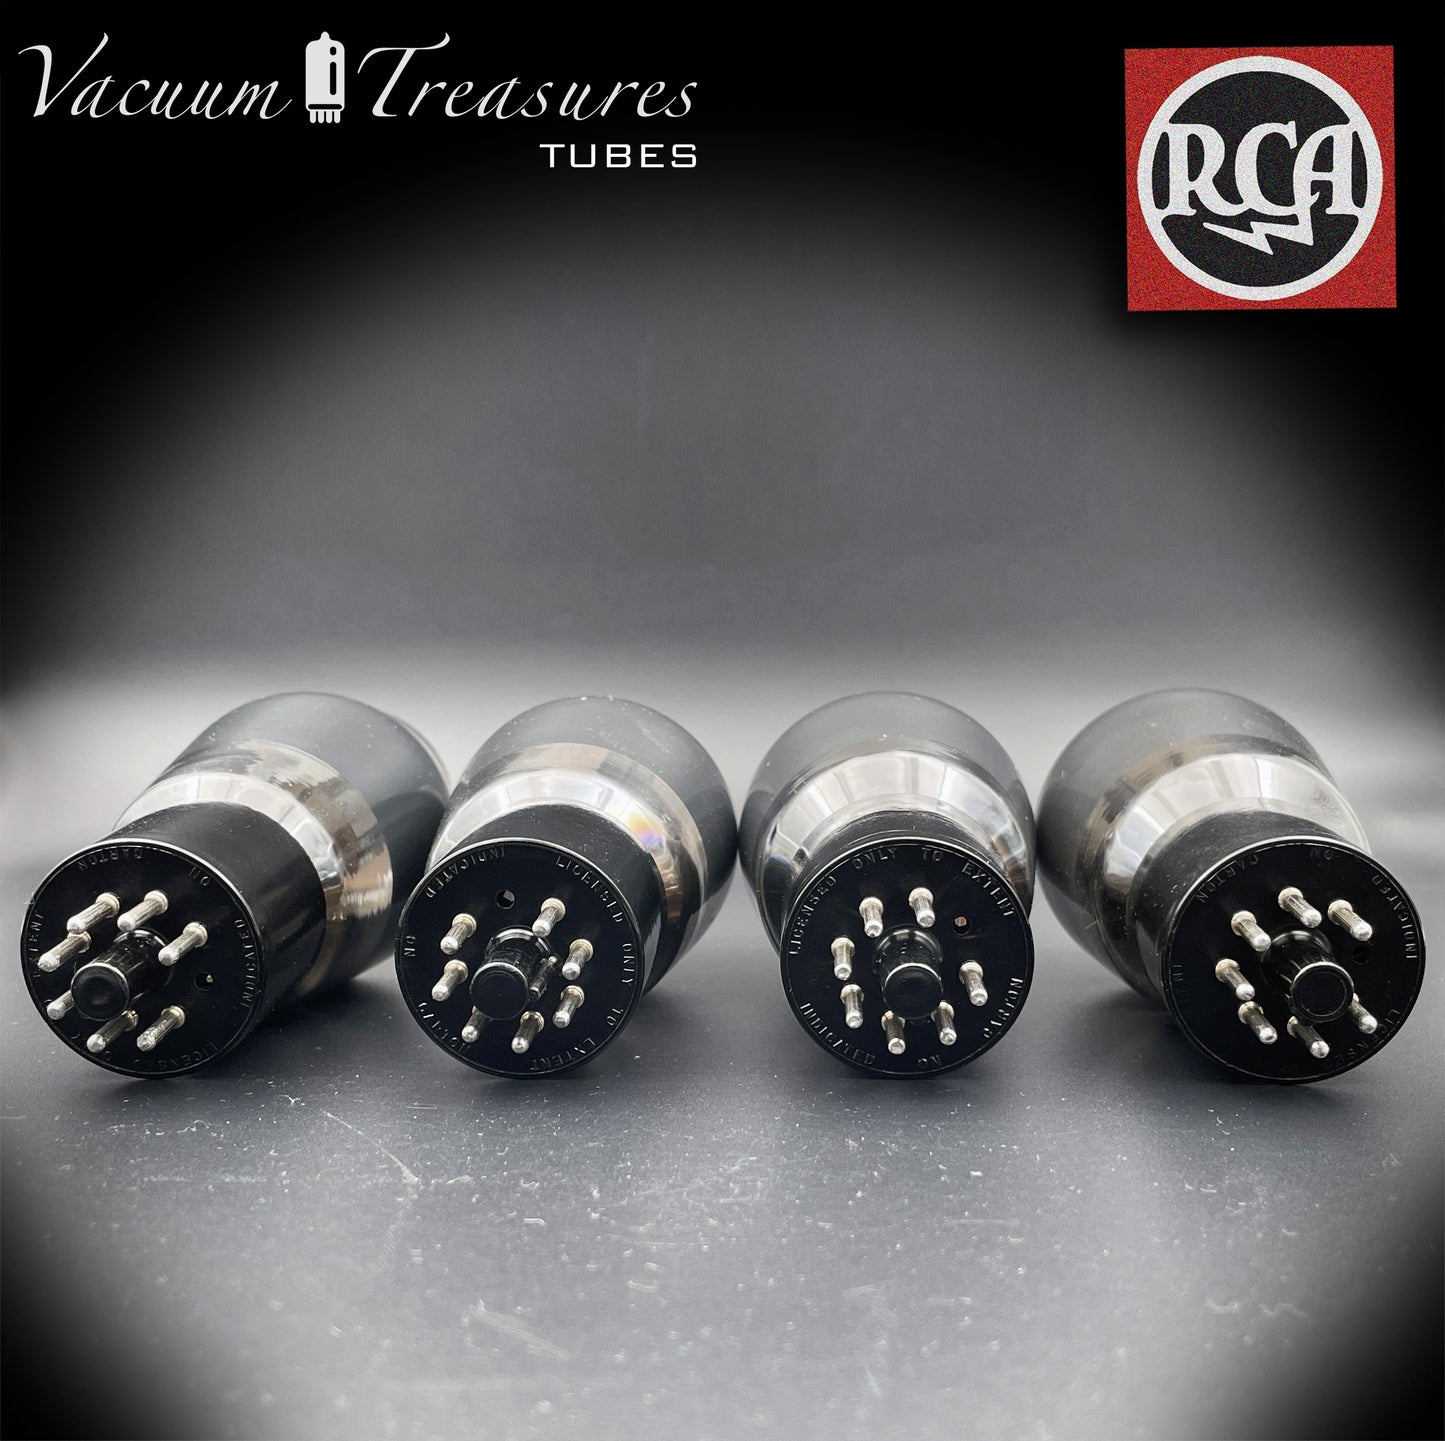 6L6G RCA Black Plates Smoked Glass Square Getter Matched Tubes Made in USA